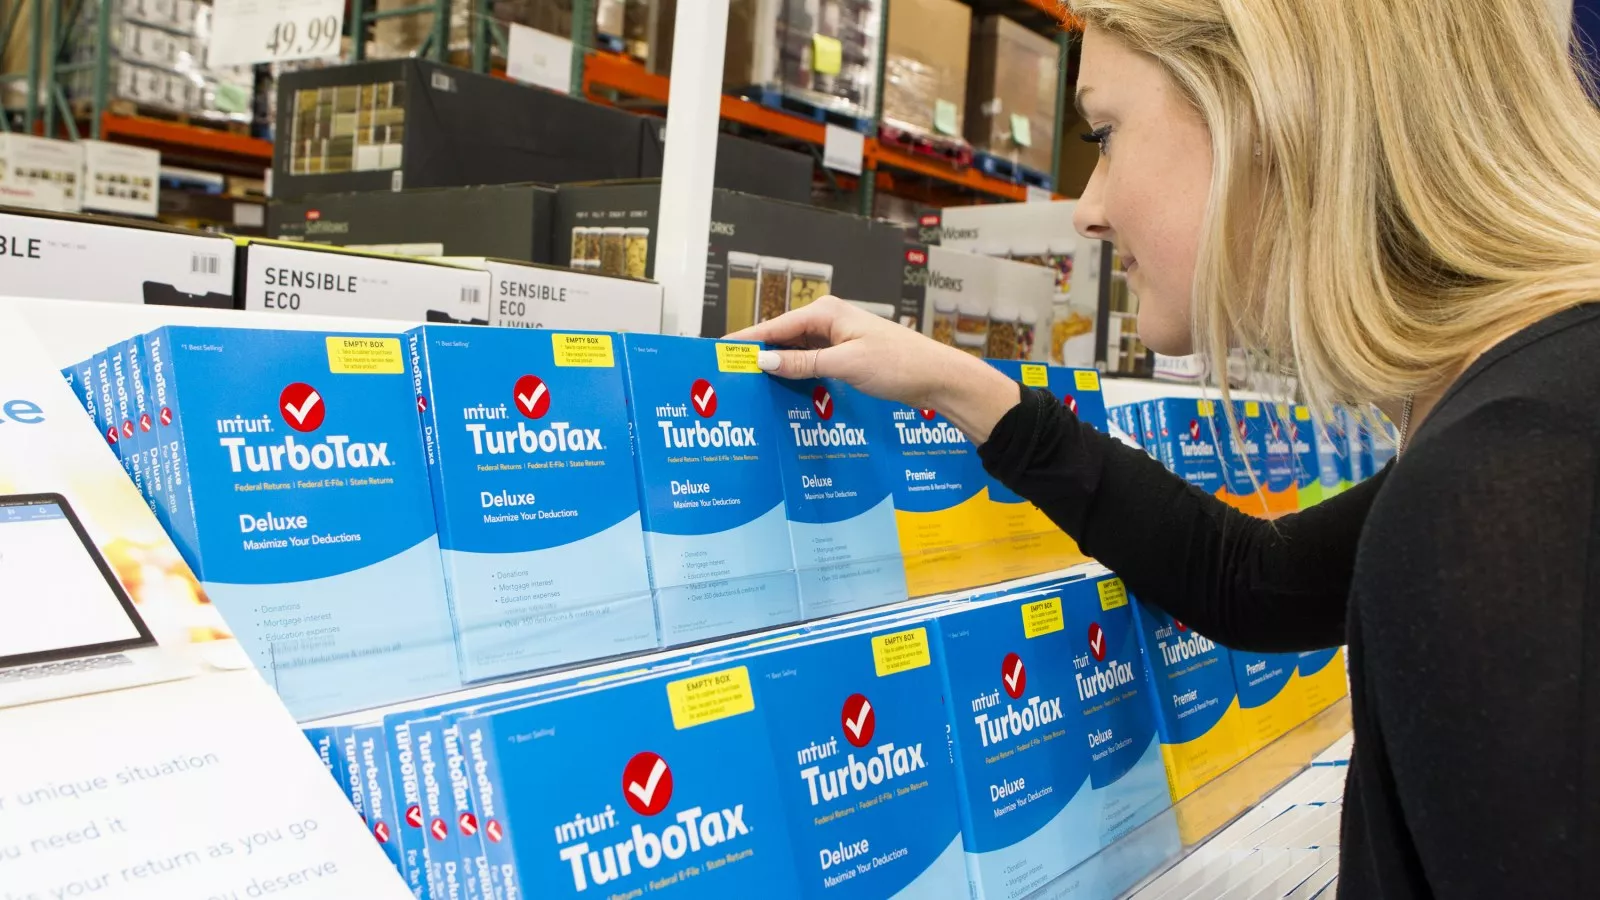 Oops! TurboTax Slip-Up Could Mean Extra Cash for Oregon Tax Filers